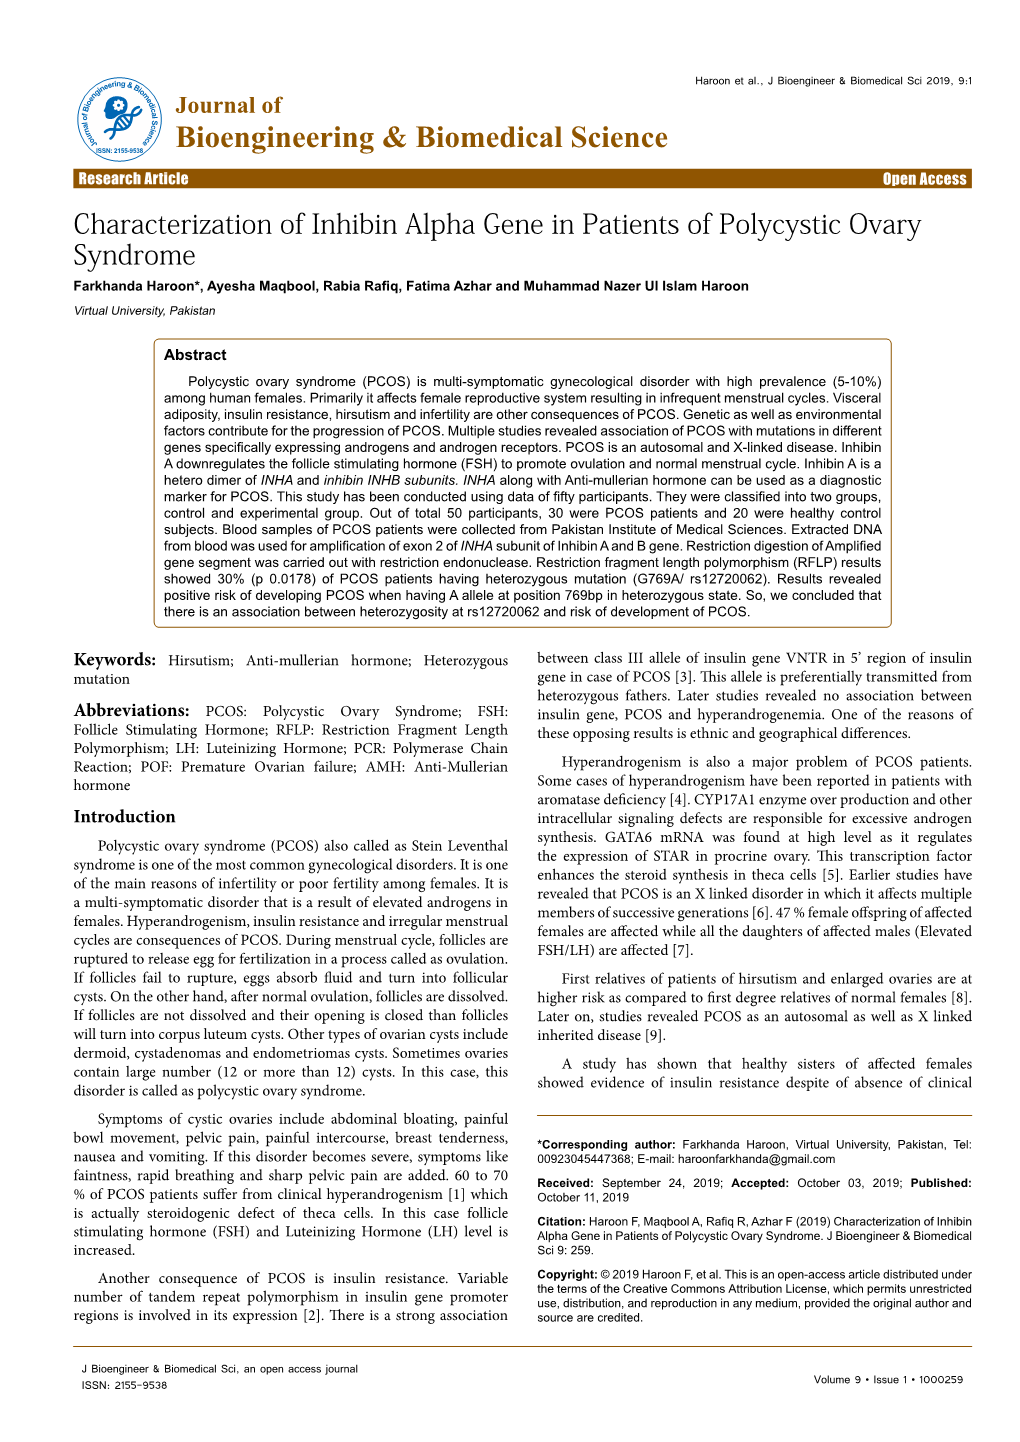 Characterization of Inhibin Alpha Gene in Patients of Polycystic Ovary